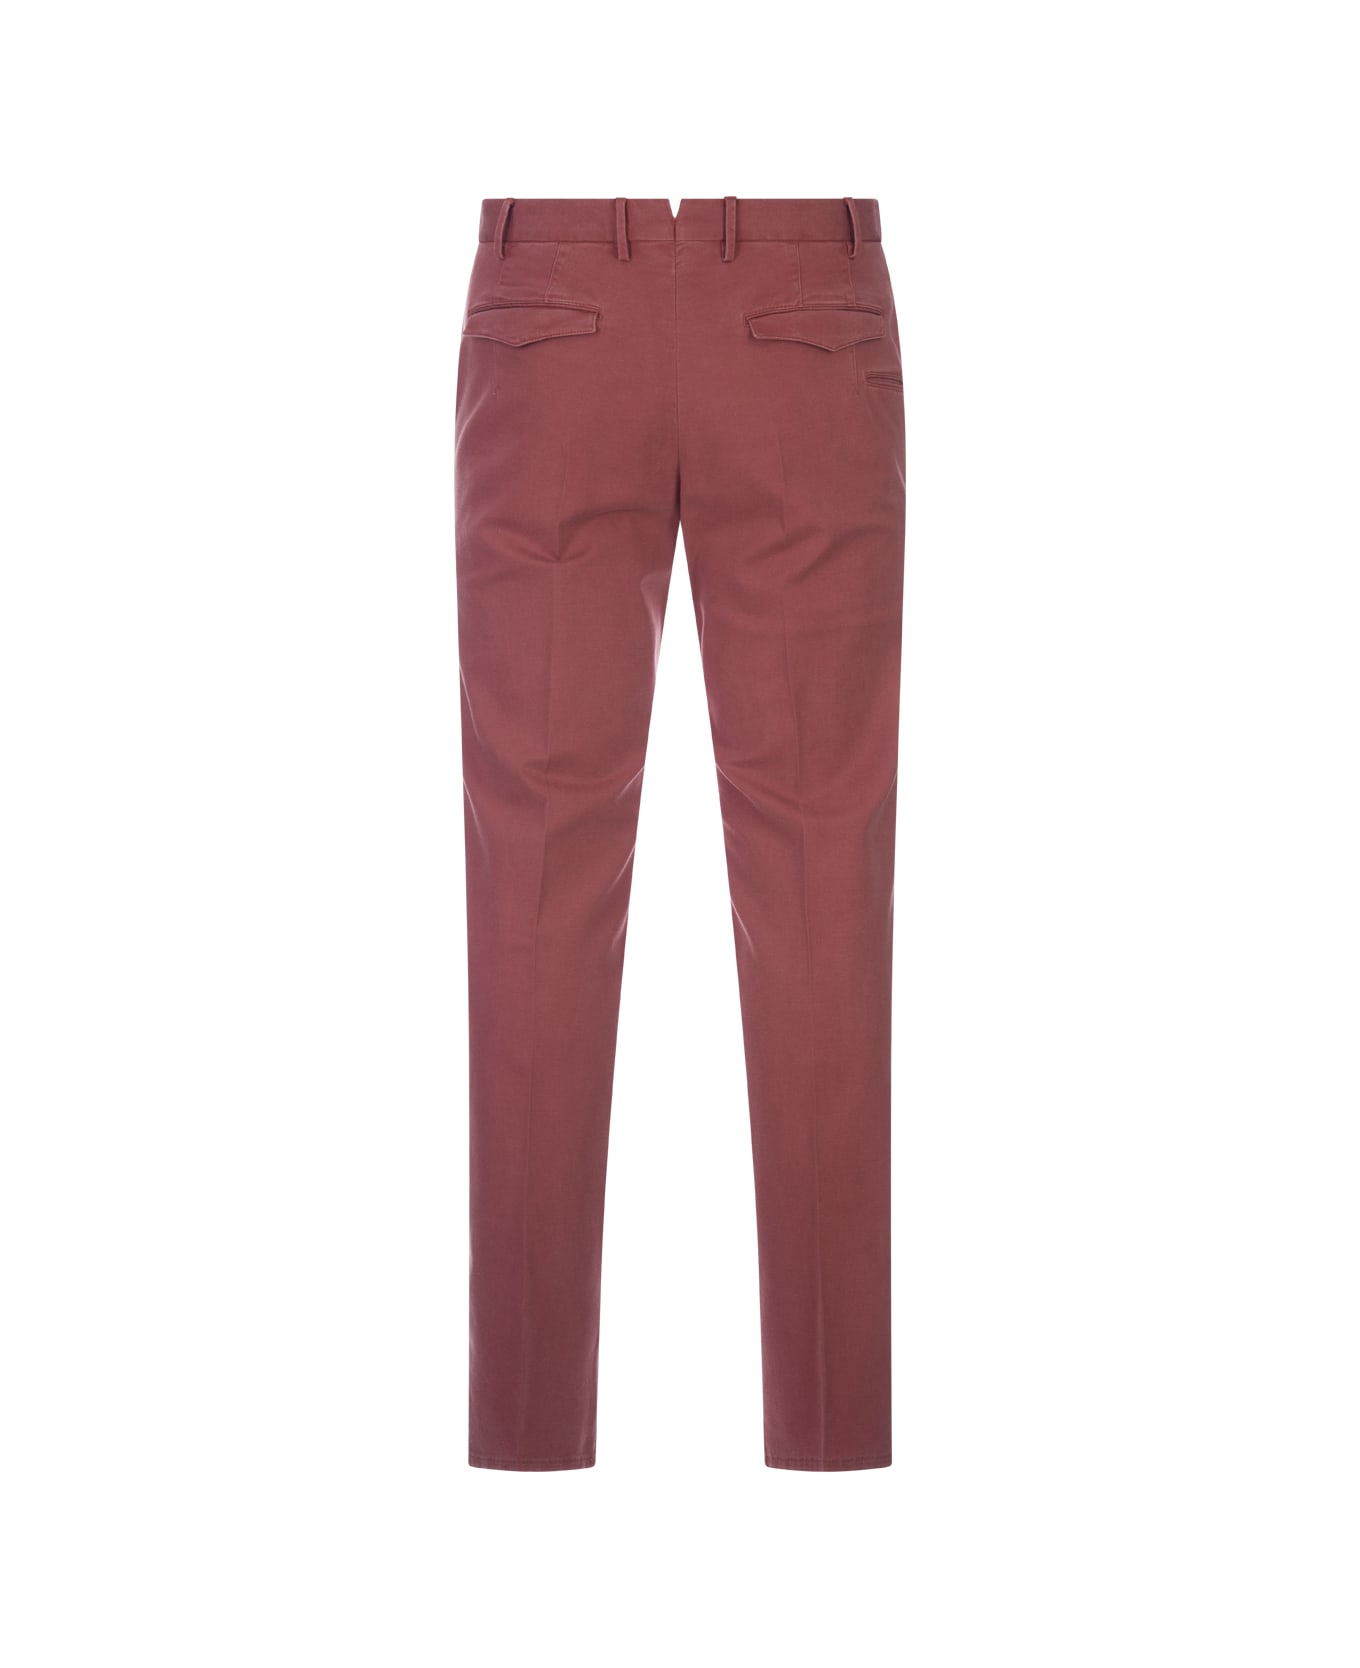 PT Torino Red Stretch Fabric Master Fit Trousers - Red